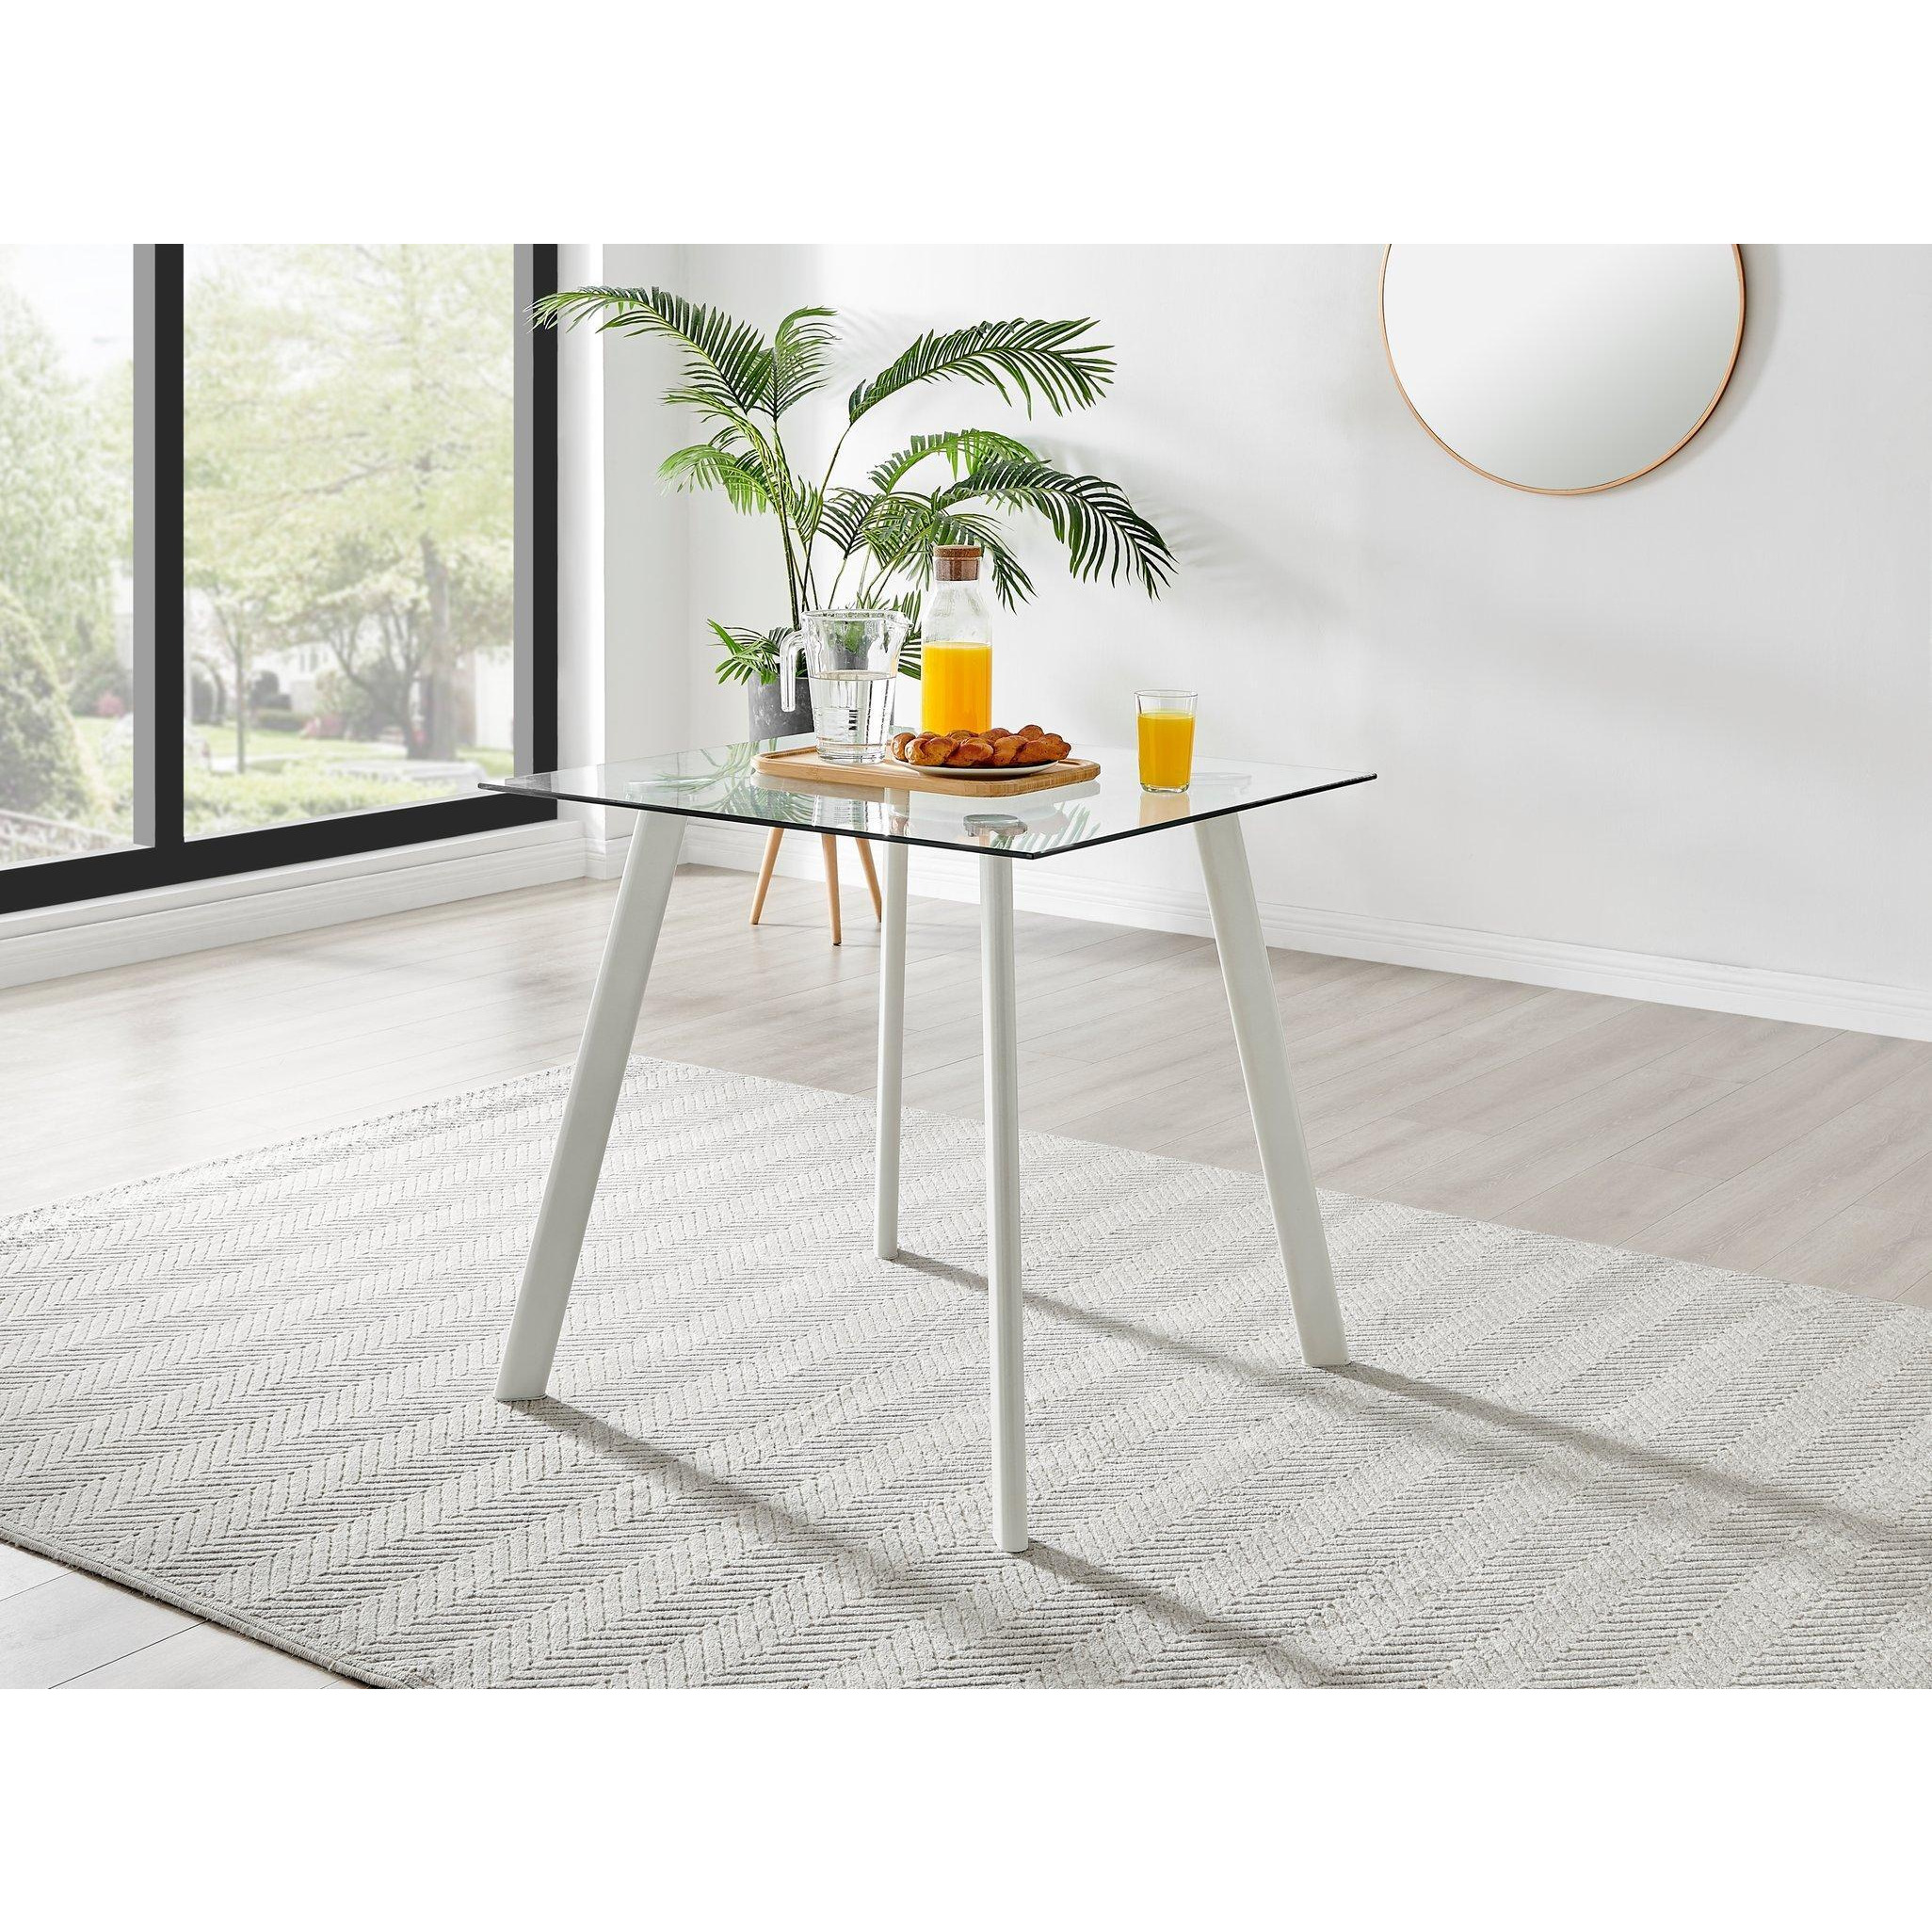 Seattle 80cm 4-Seater Square Space Saving Glass Dining Table With Metal Legs - image 1